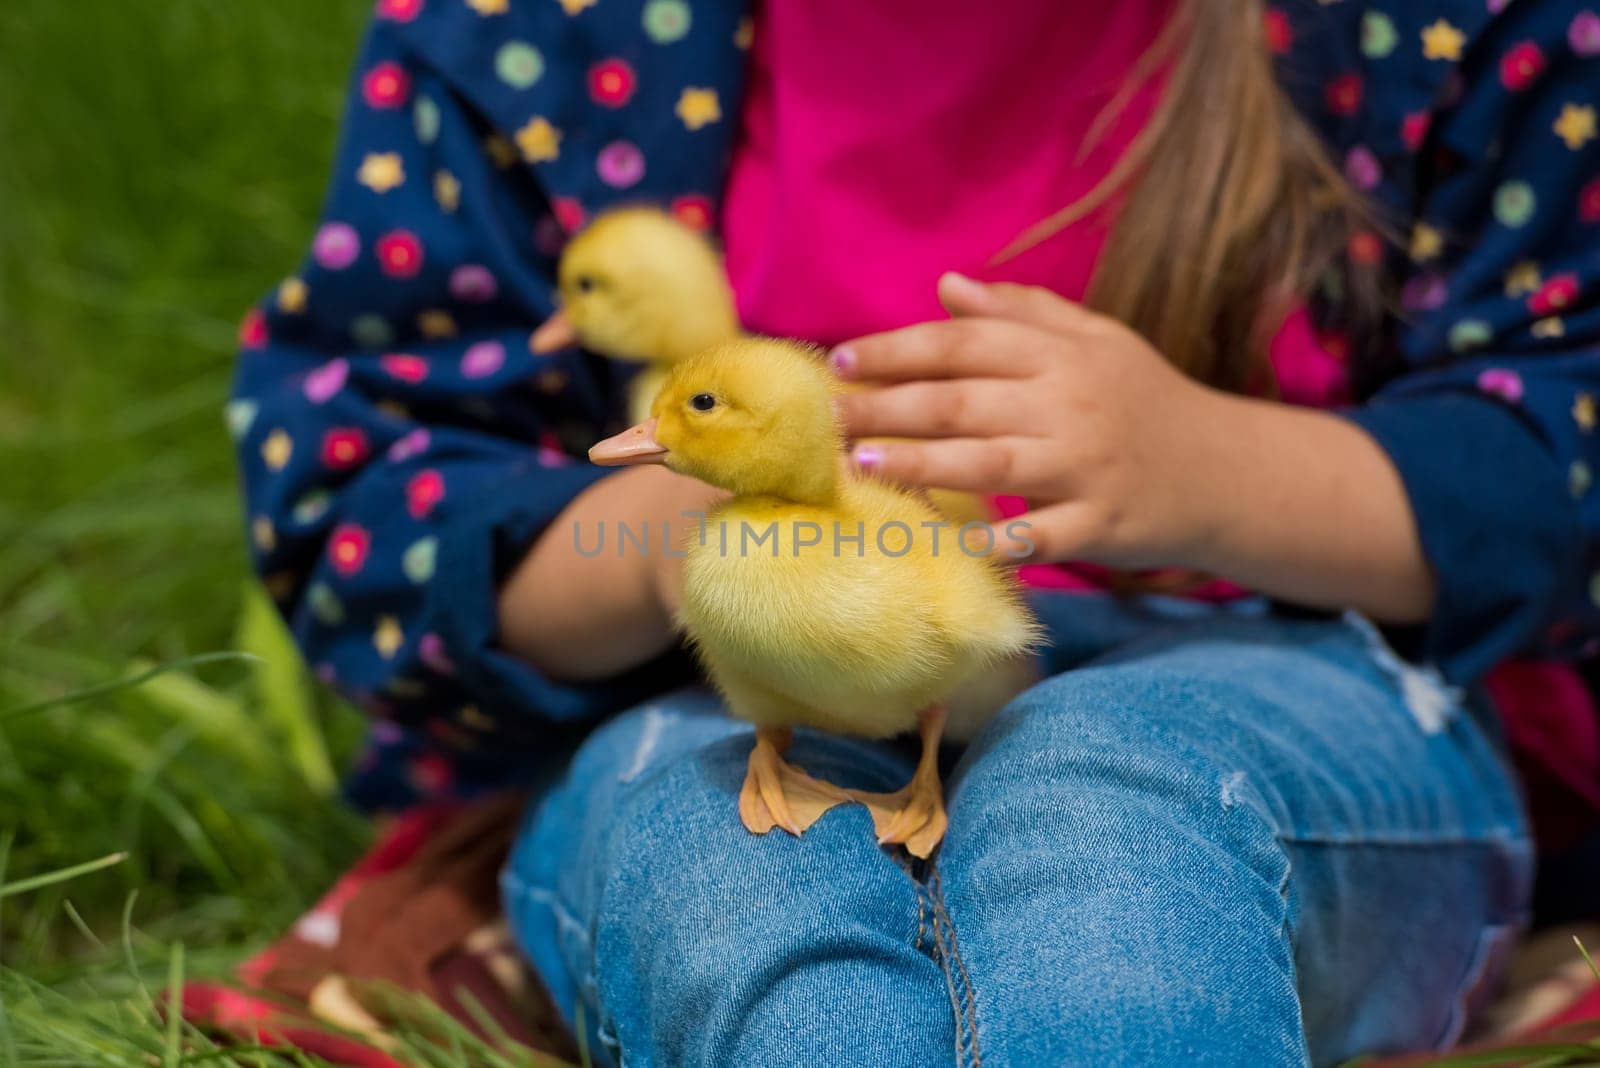 Little girl holding small ducklings in the garden. Close-up. Yellow duckling in her hands.